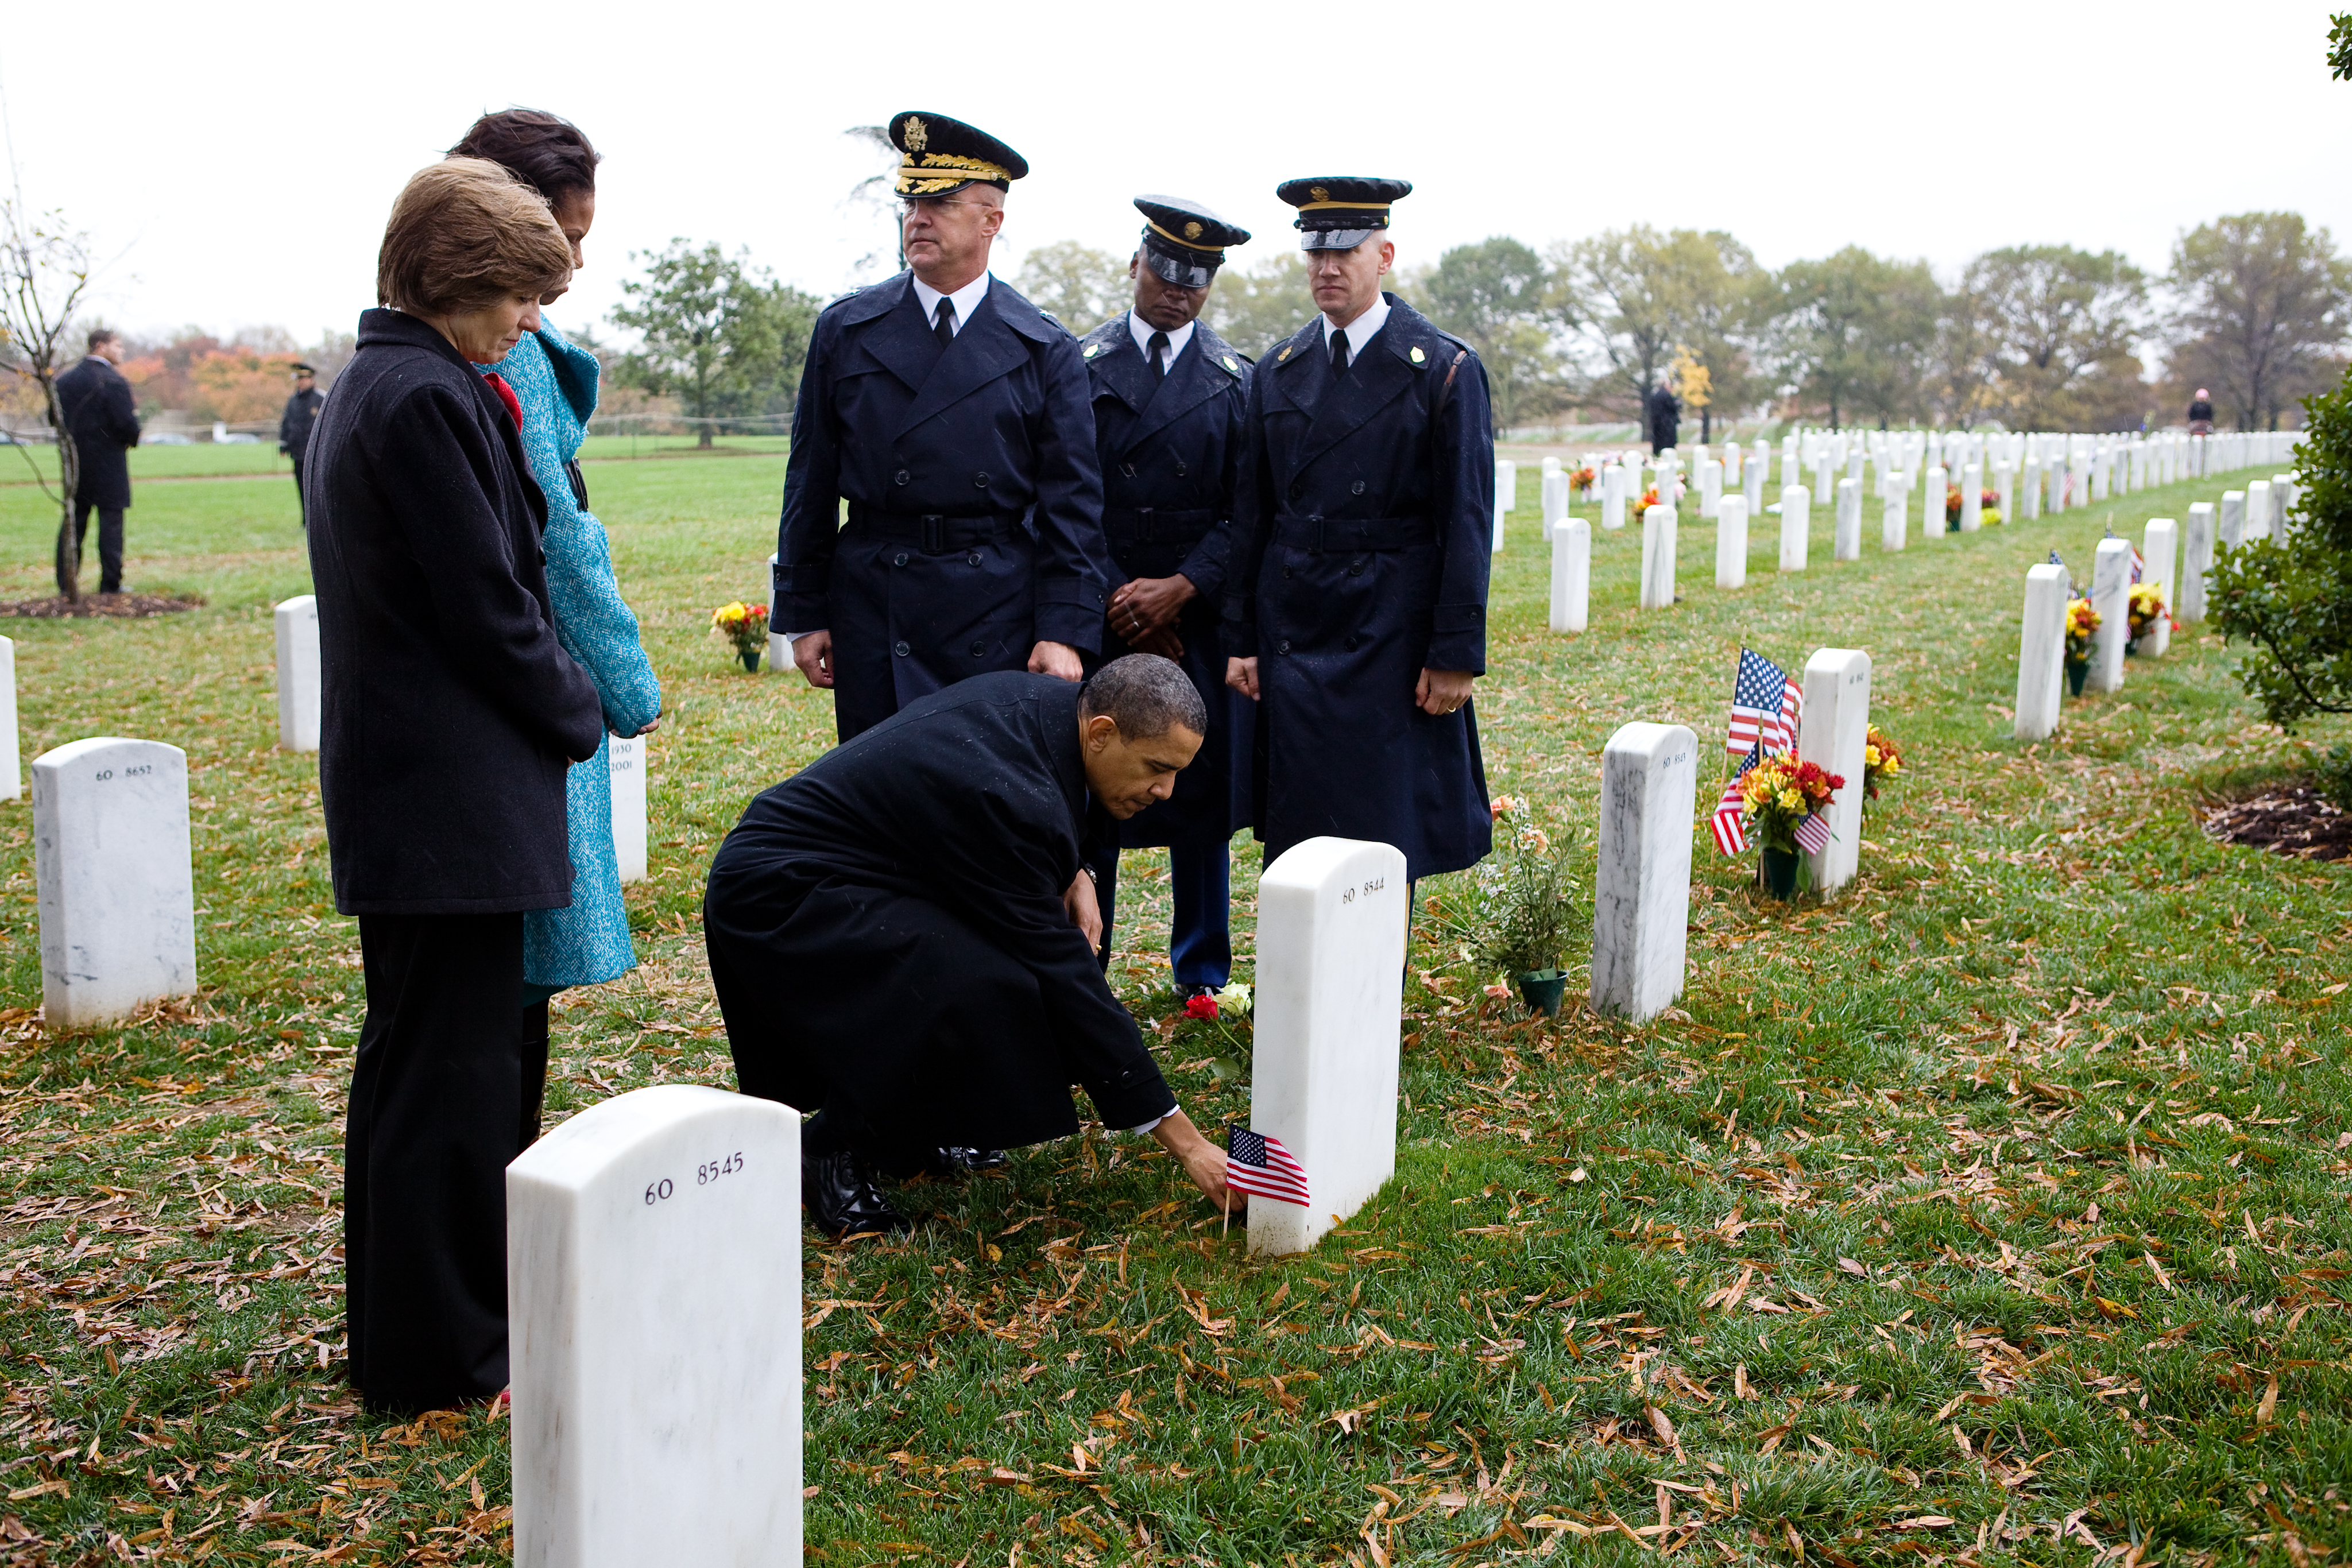 Barack Obama leaves a presidential coin at the gravesite of Ross McGinnis at Arlington Cemetery